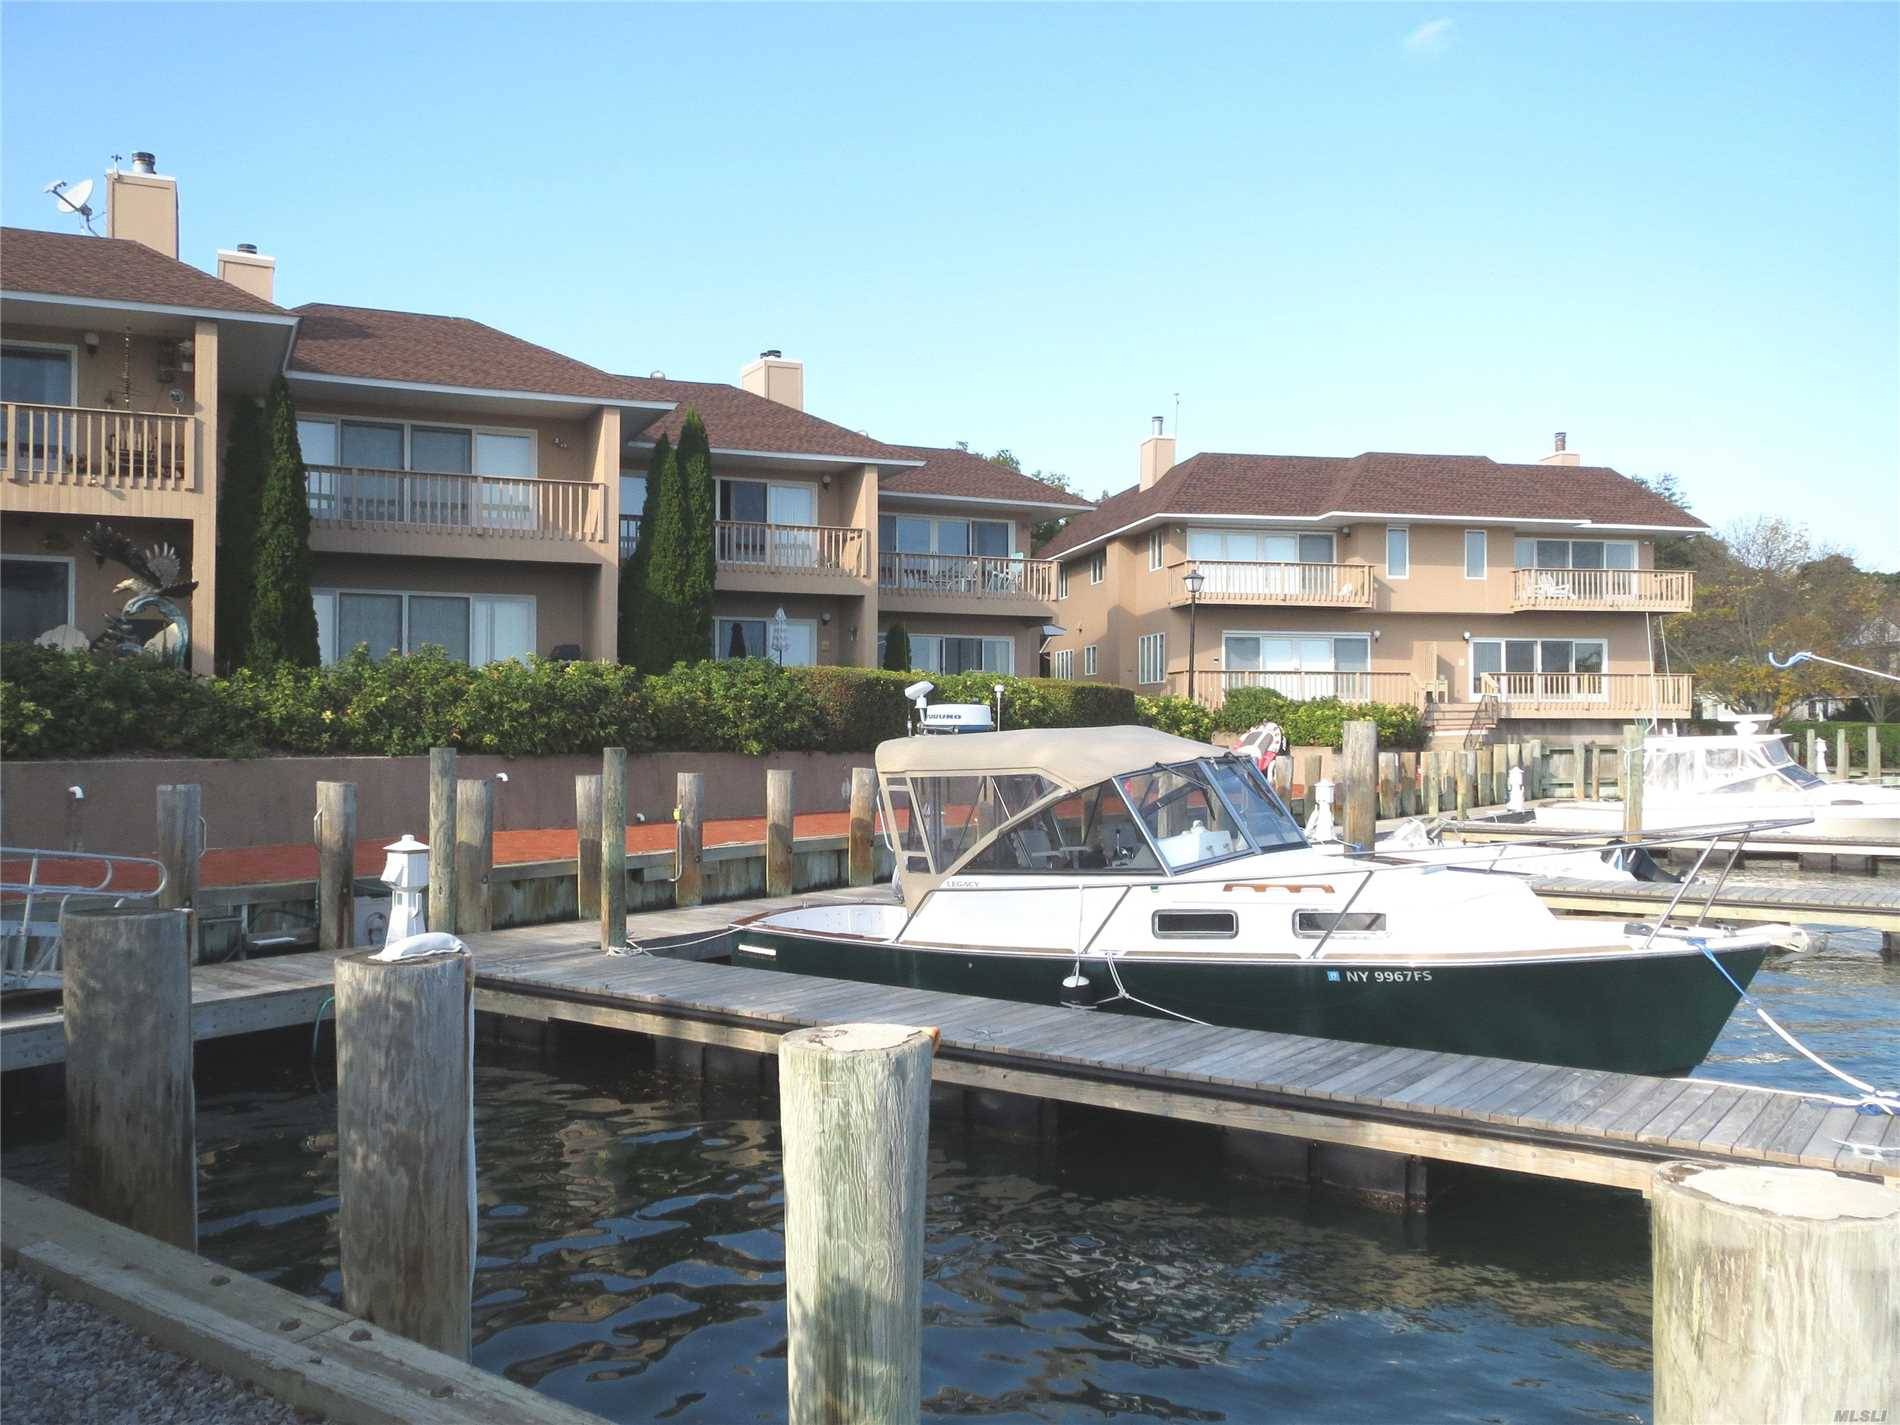 Dock Your Boat Outside The Door, Relax On Decks Of This Luxury Condo And Enjoy Beautiful Views Of Bay And Shelter Island.